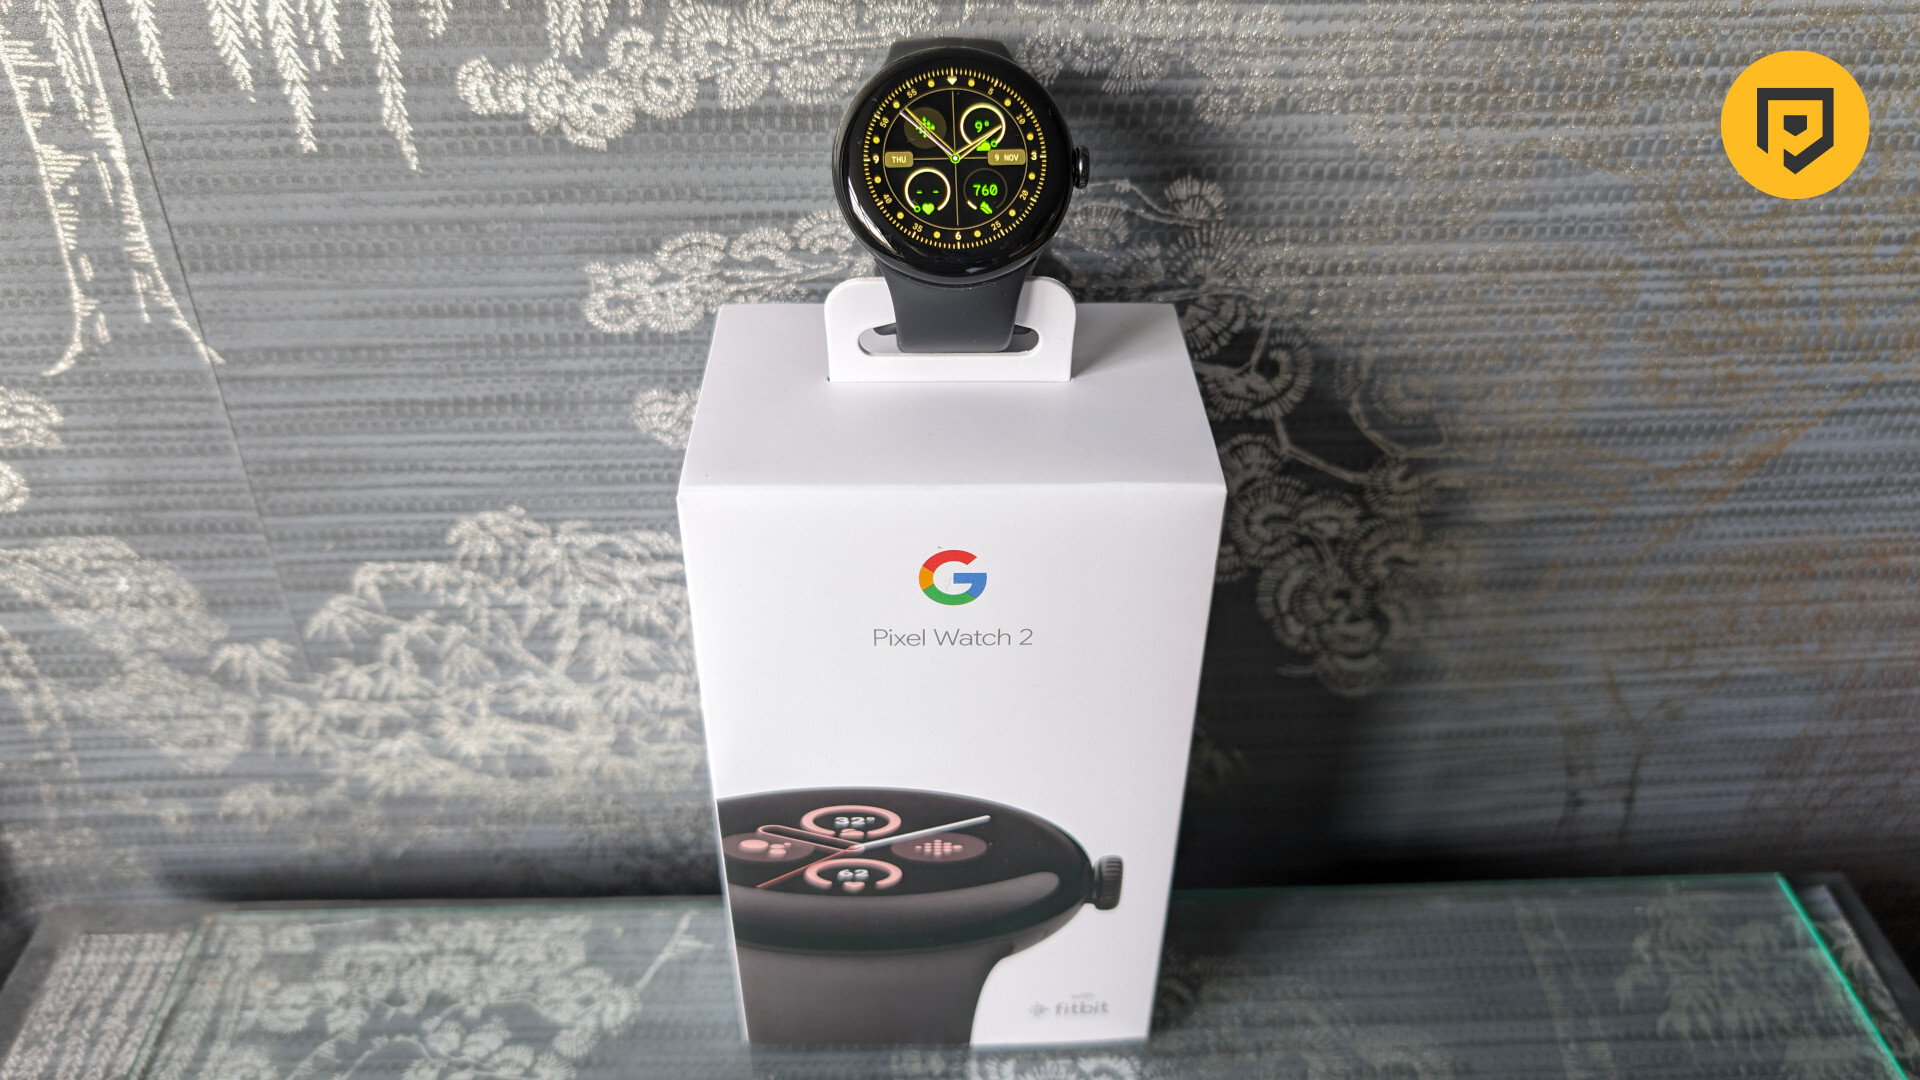 Google Pixel Watch 2 arrives with new chipset and improved battery life -   news